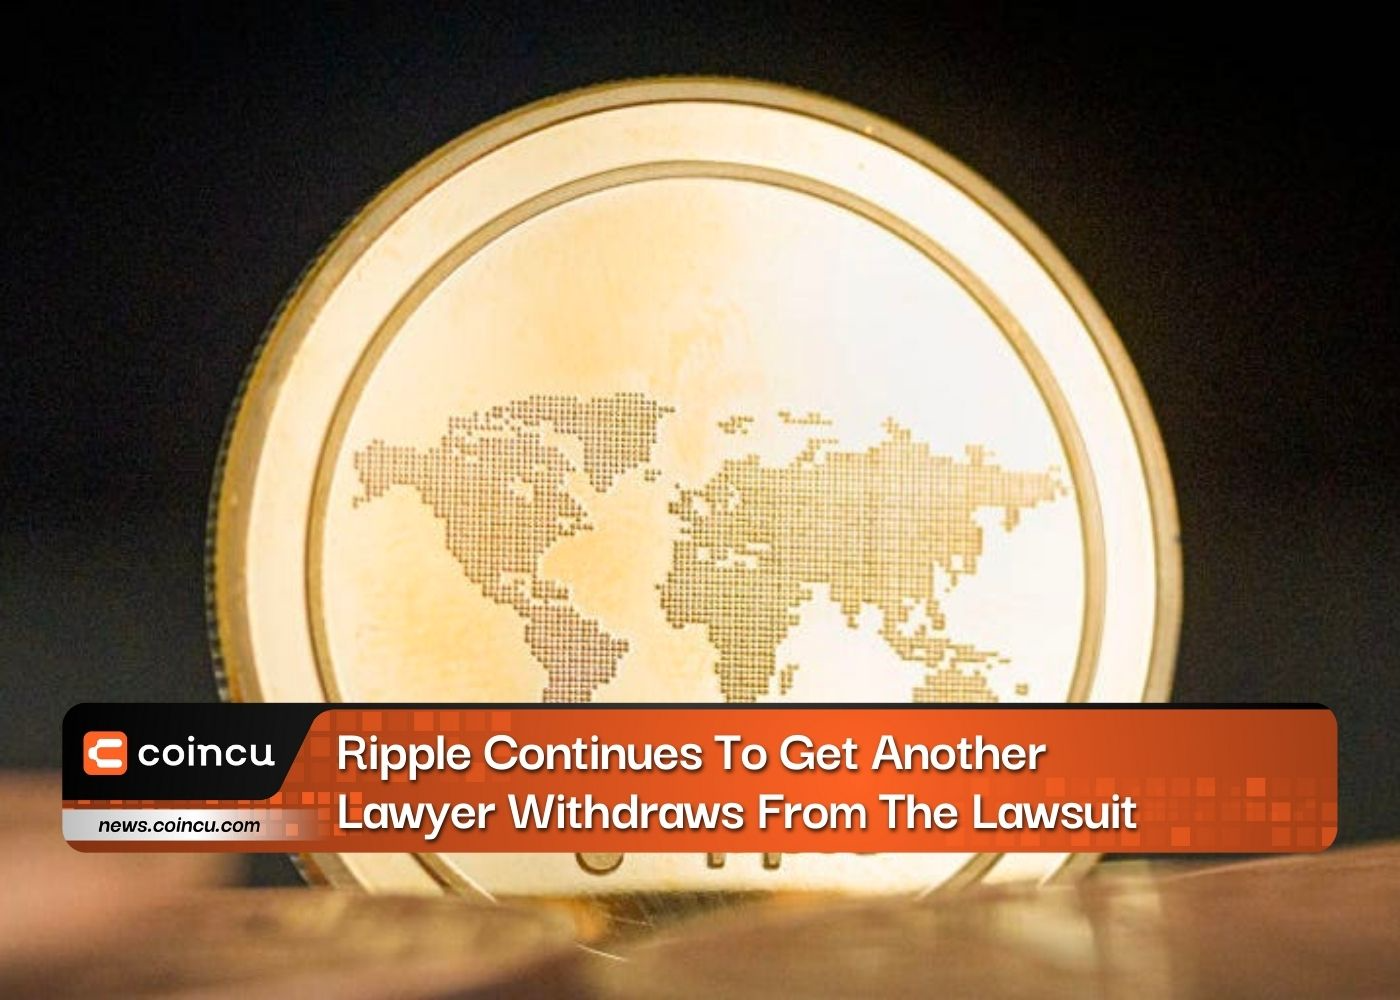 Ripple Continues To Get Another Lawyer Withdraws From The Lawsuit